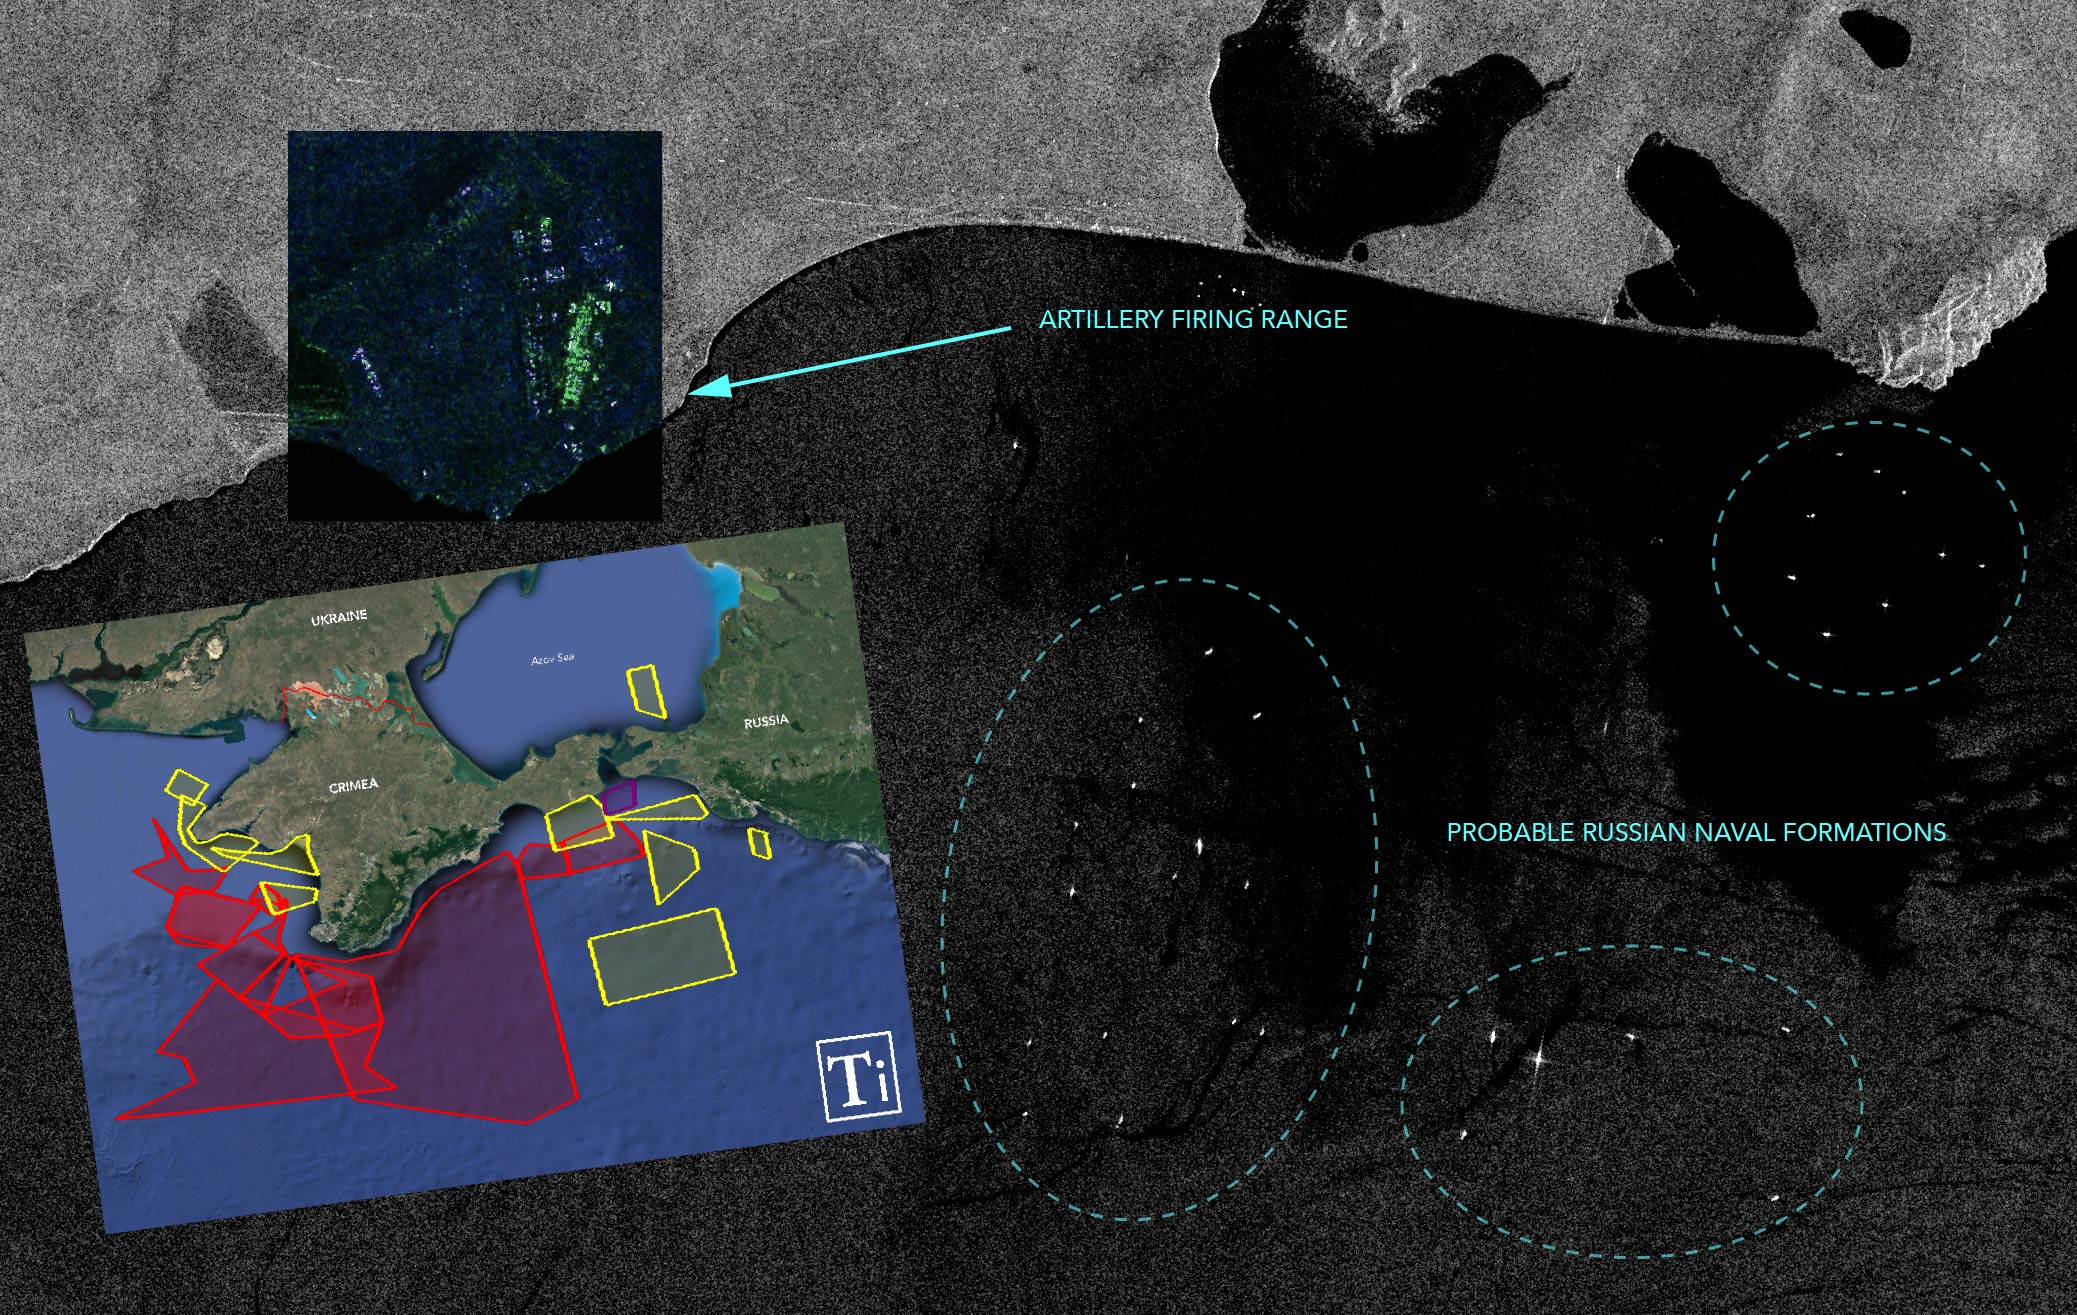 “Do Not Enter:” Using OSINT to Monitor Russia’s Wargames in the Black Sea